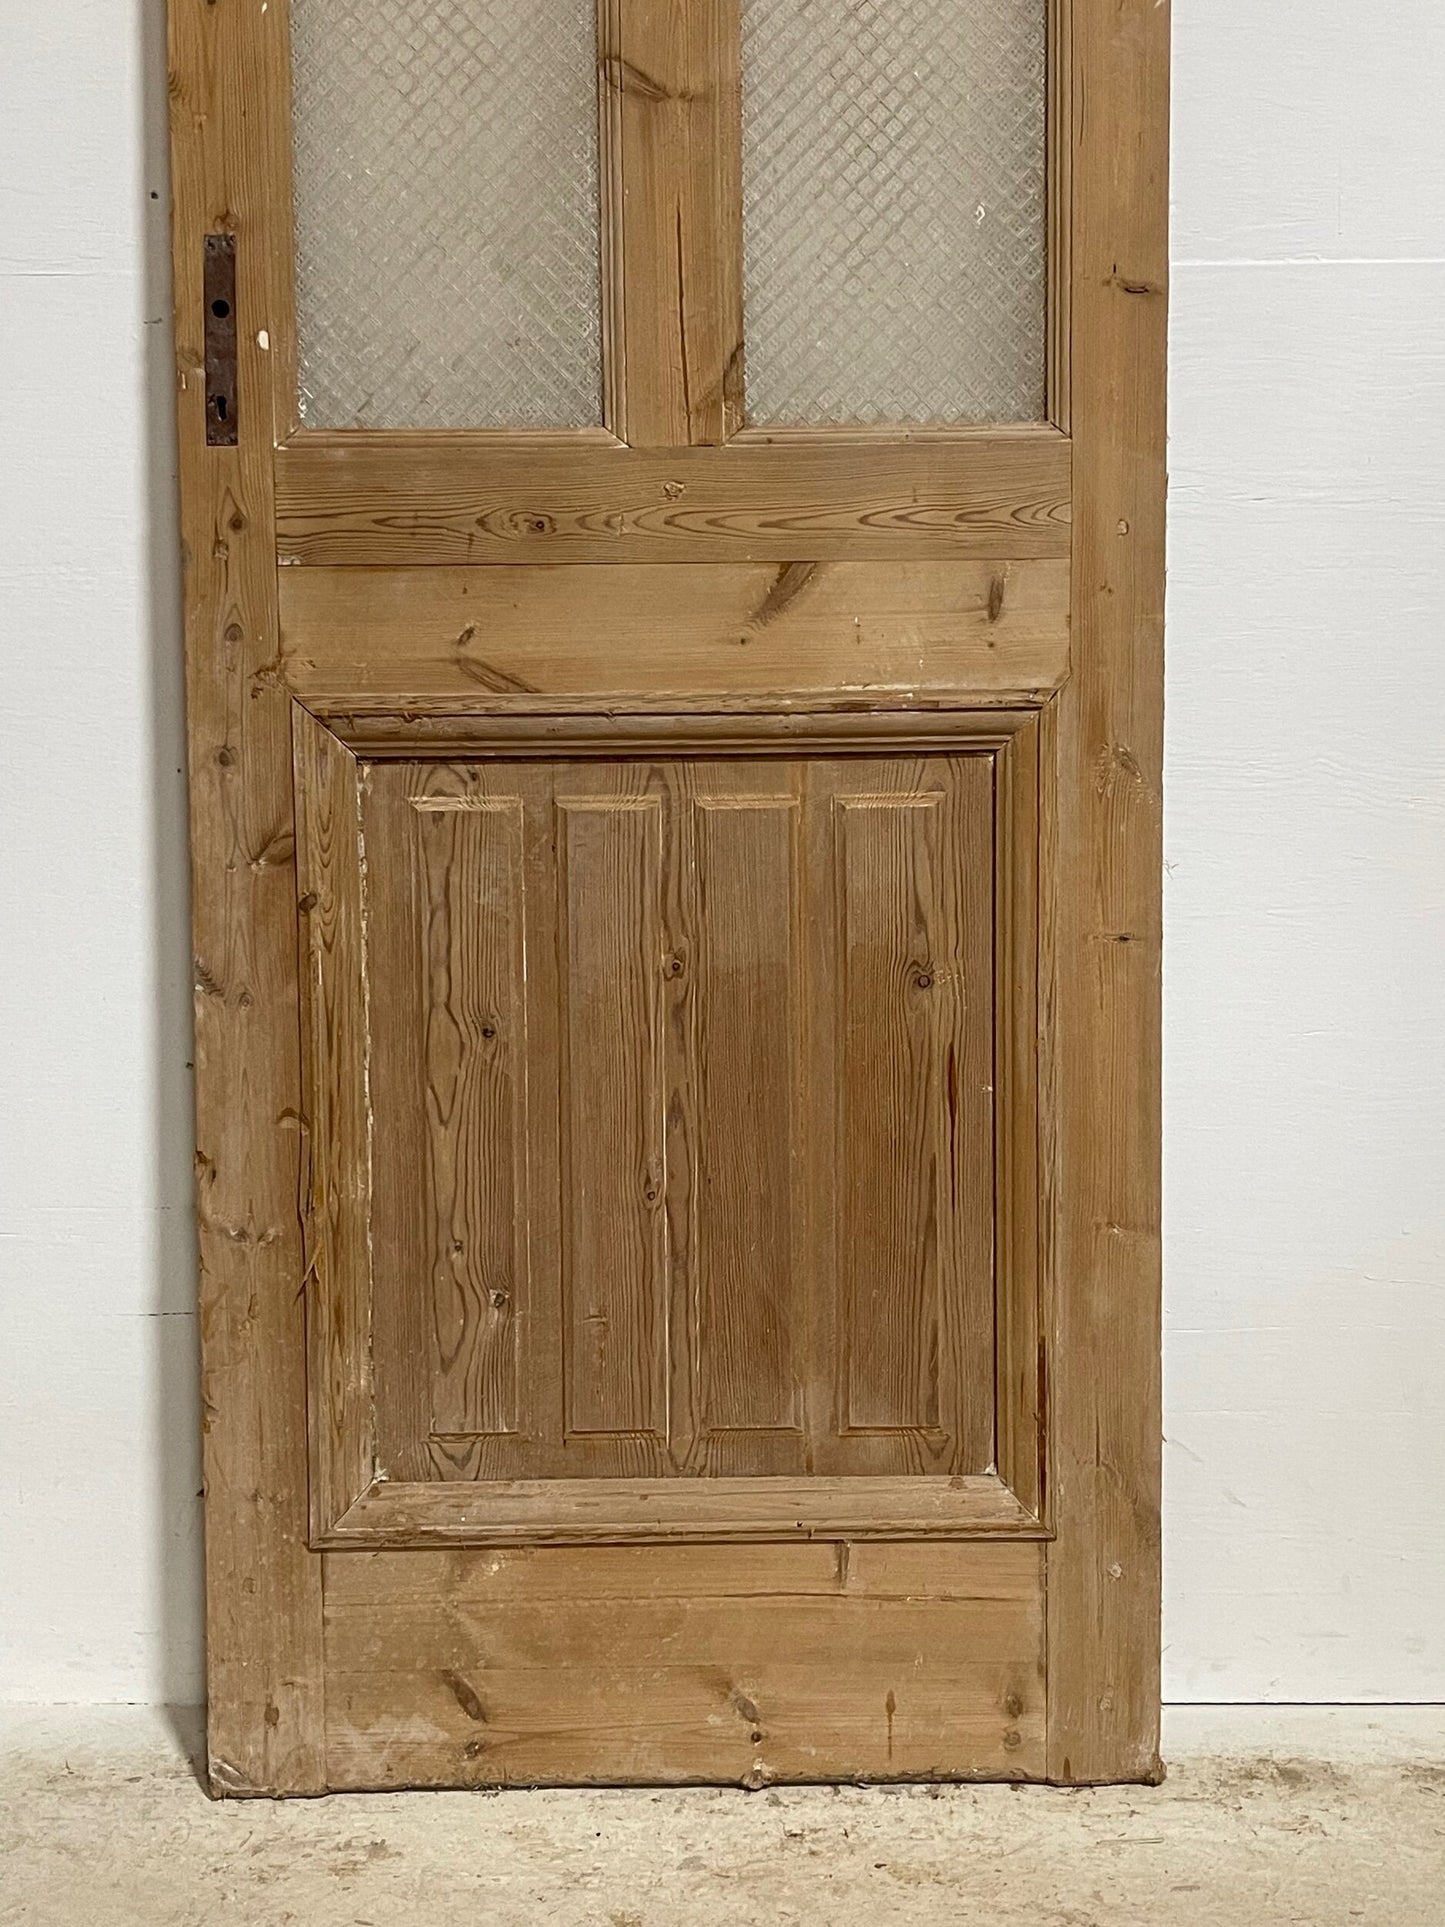 Antique French door with glass (86.25x30.25) H0170s